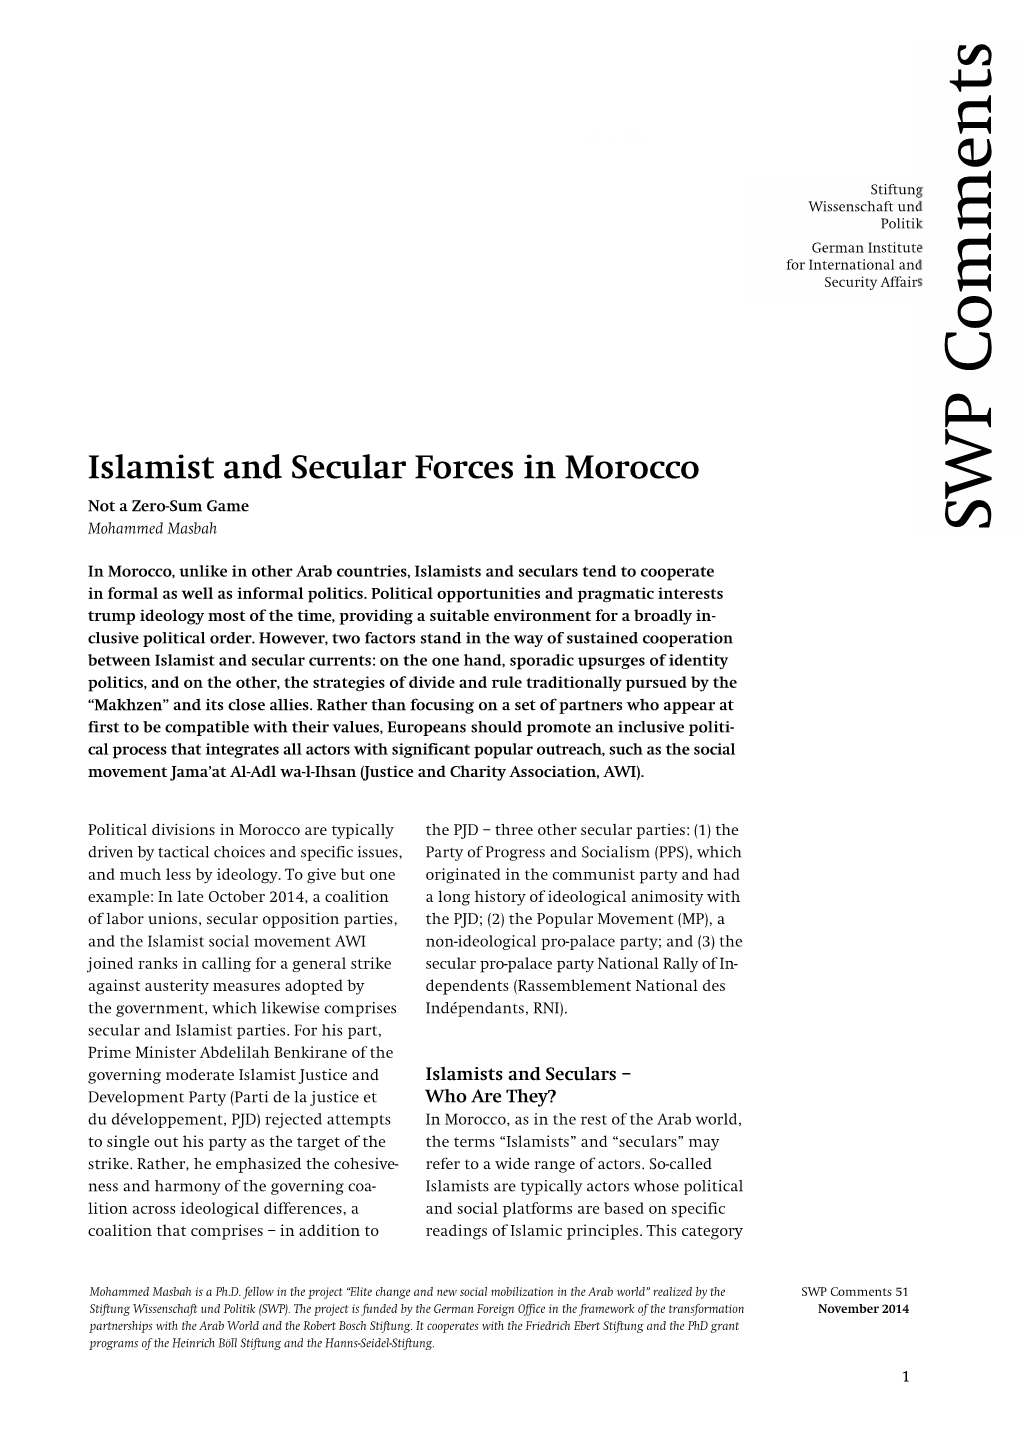 Islamist and Secular Forces in Morocco WP Not a Zero-Sum Game